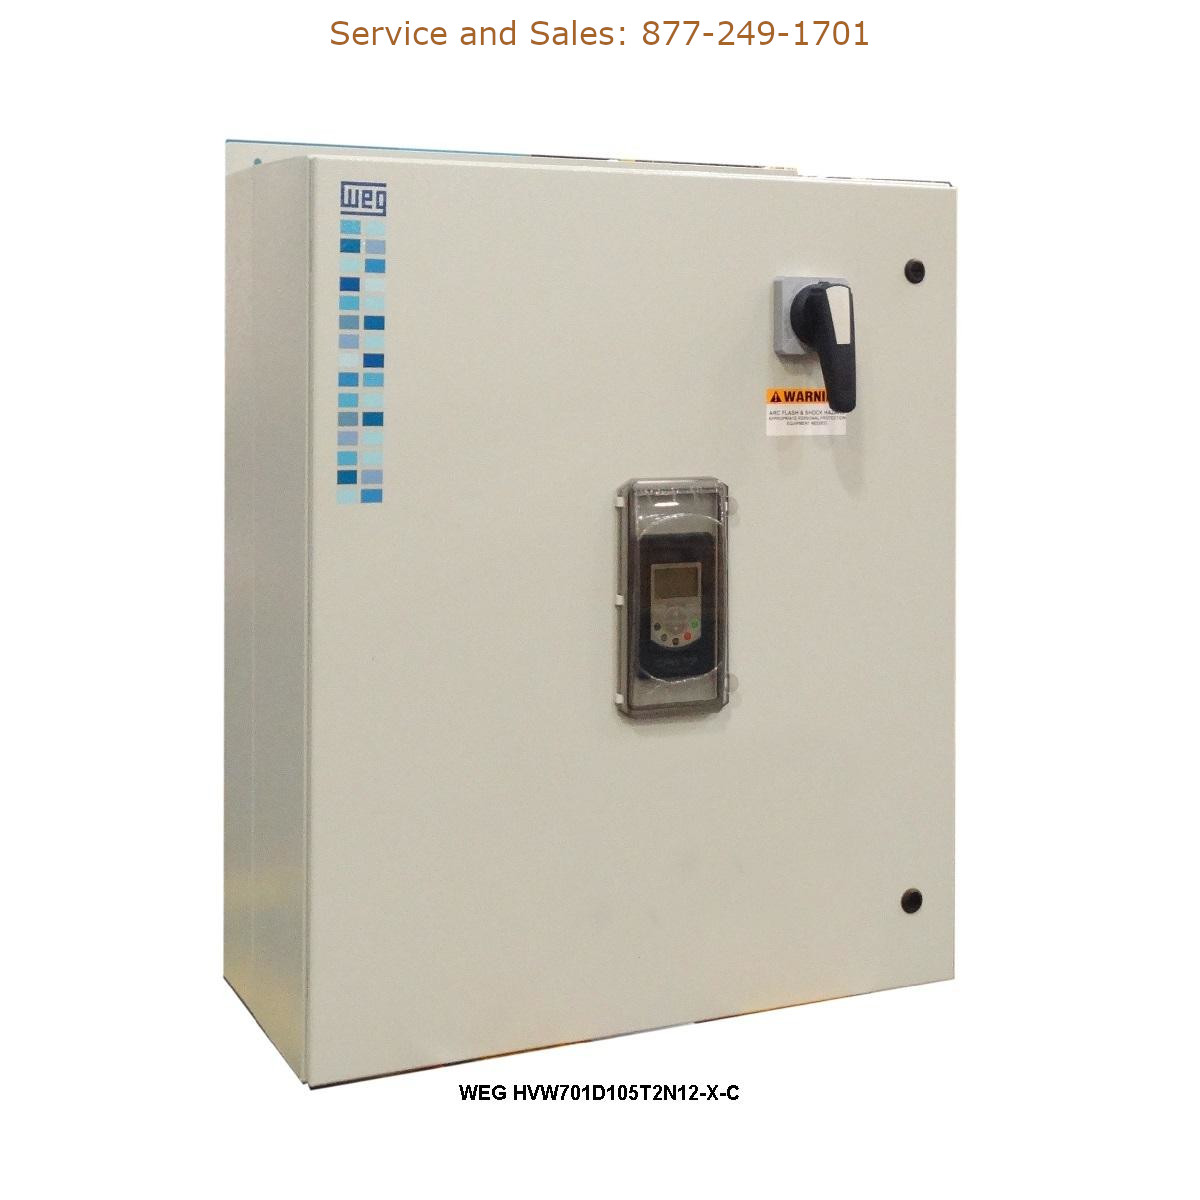 WEG HVW701D105T2N12-X-C WEG Model Number HVW701D105T2N12-X-C WEG Drives, Variable Speed Drives Repair Service, Troubleshooting, Replacement Parts https://gesrepair.com/wp-content/uploads/2022/WEG/WEG_HVW701D105T2N12-X-C_Drives_Variable_Speed_Drives.jpg